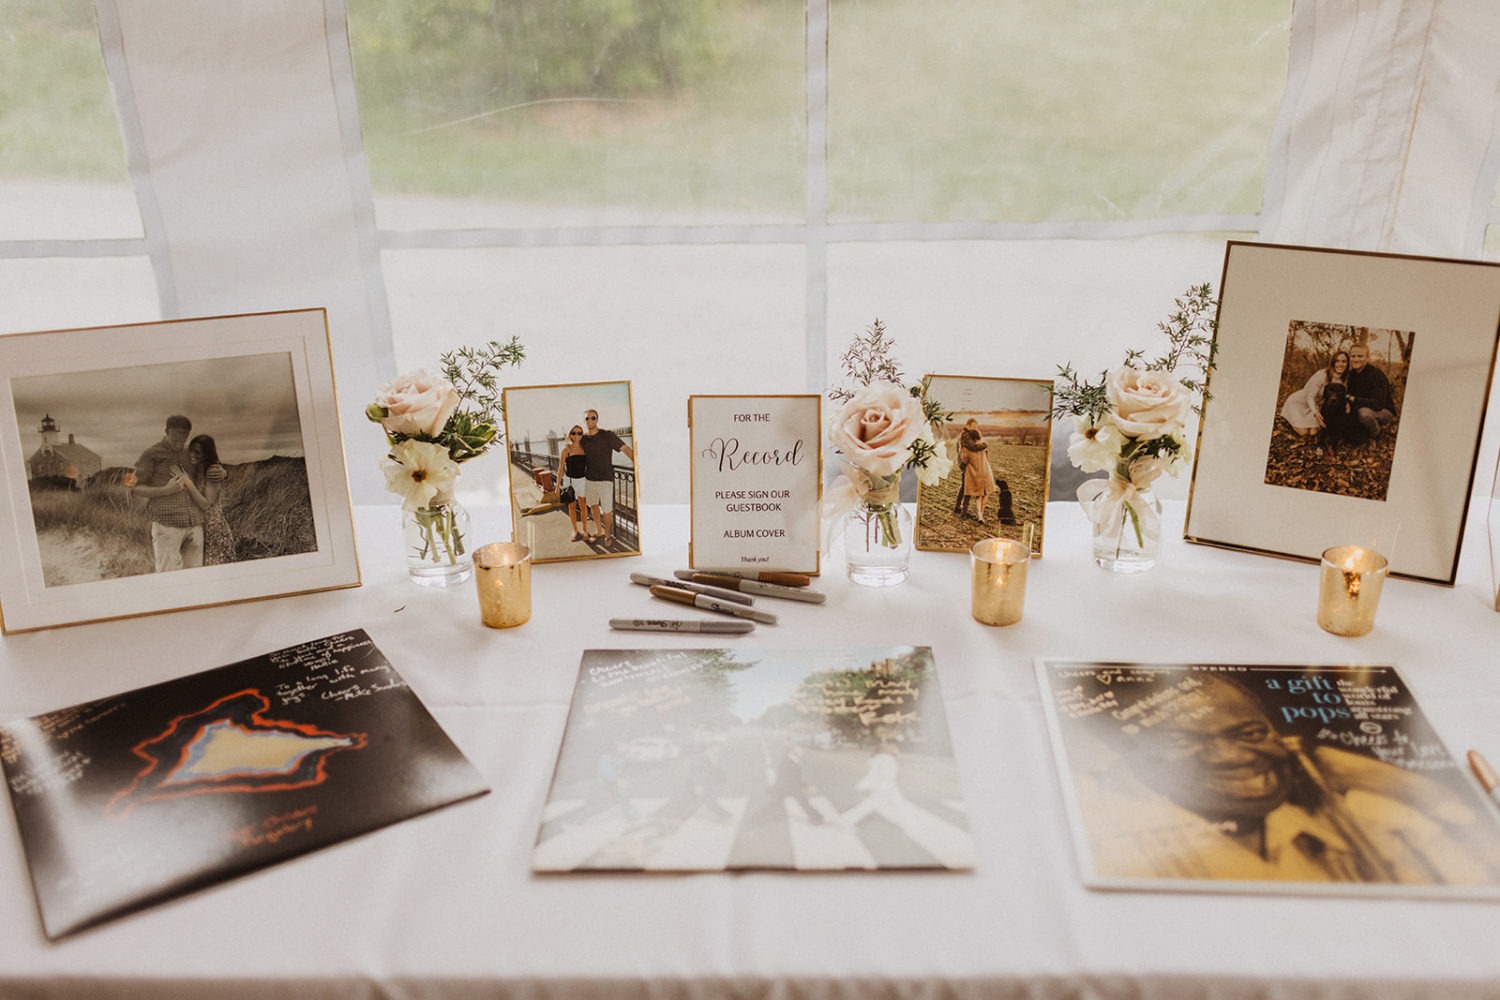 couple's photos and vinyl records on display